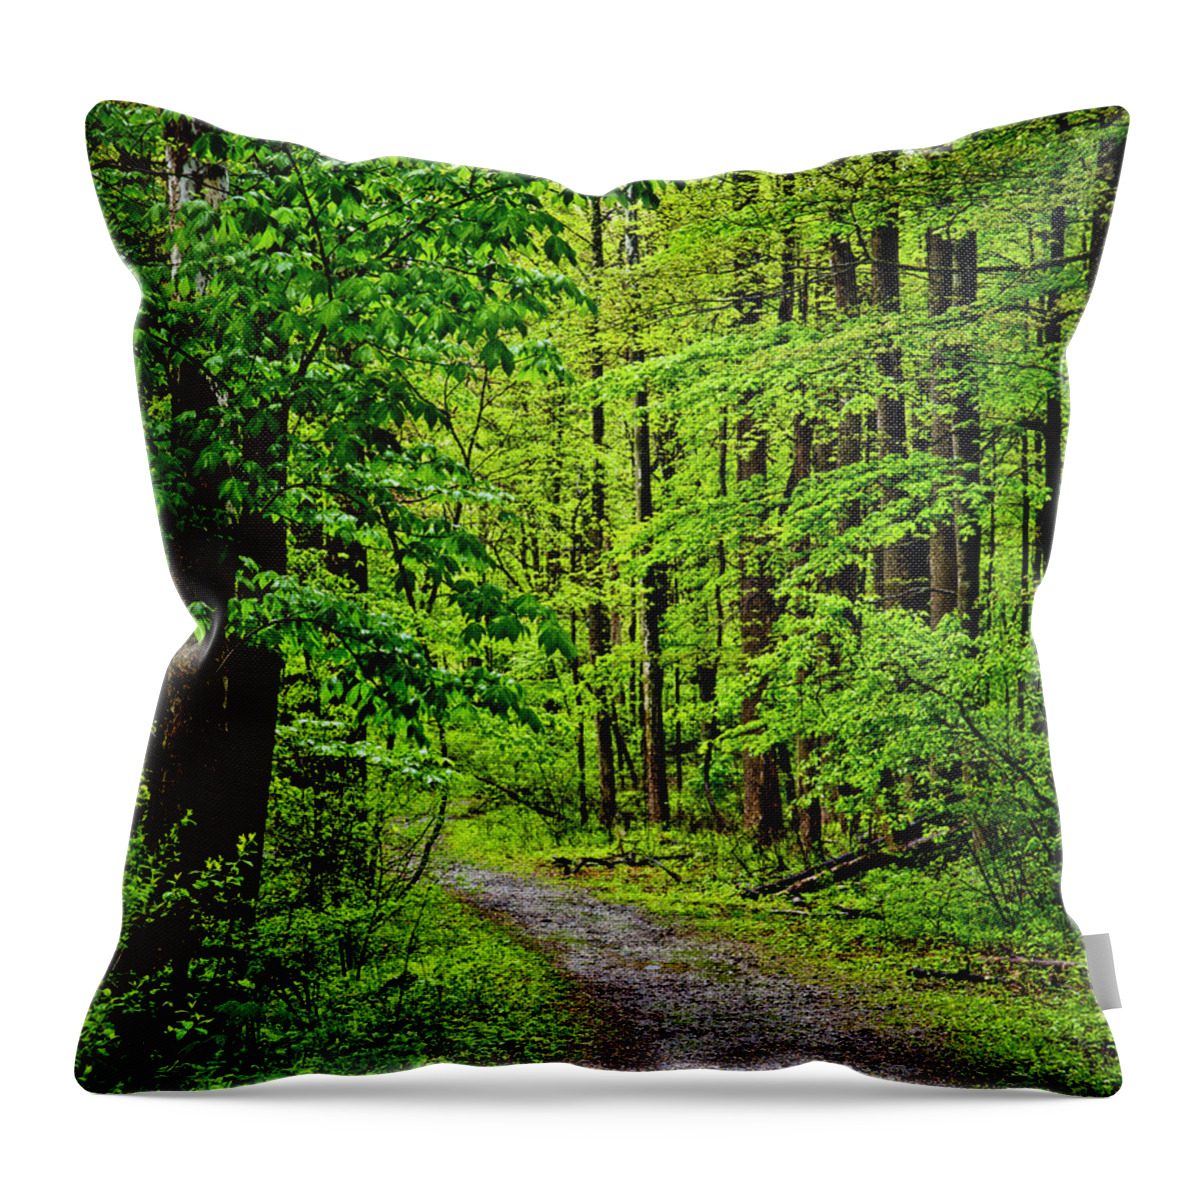 Paths Throw Pillow featuring the photograph A Quiet Walkway Without Destination by Kathy McClure